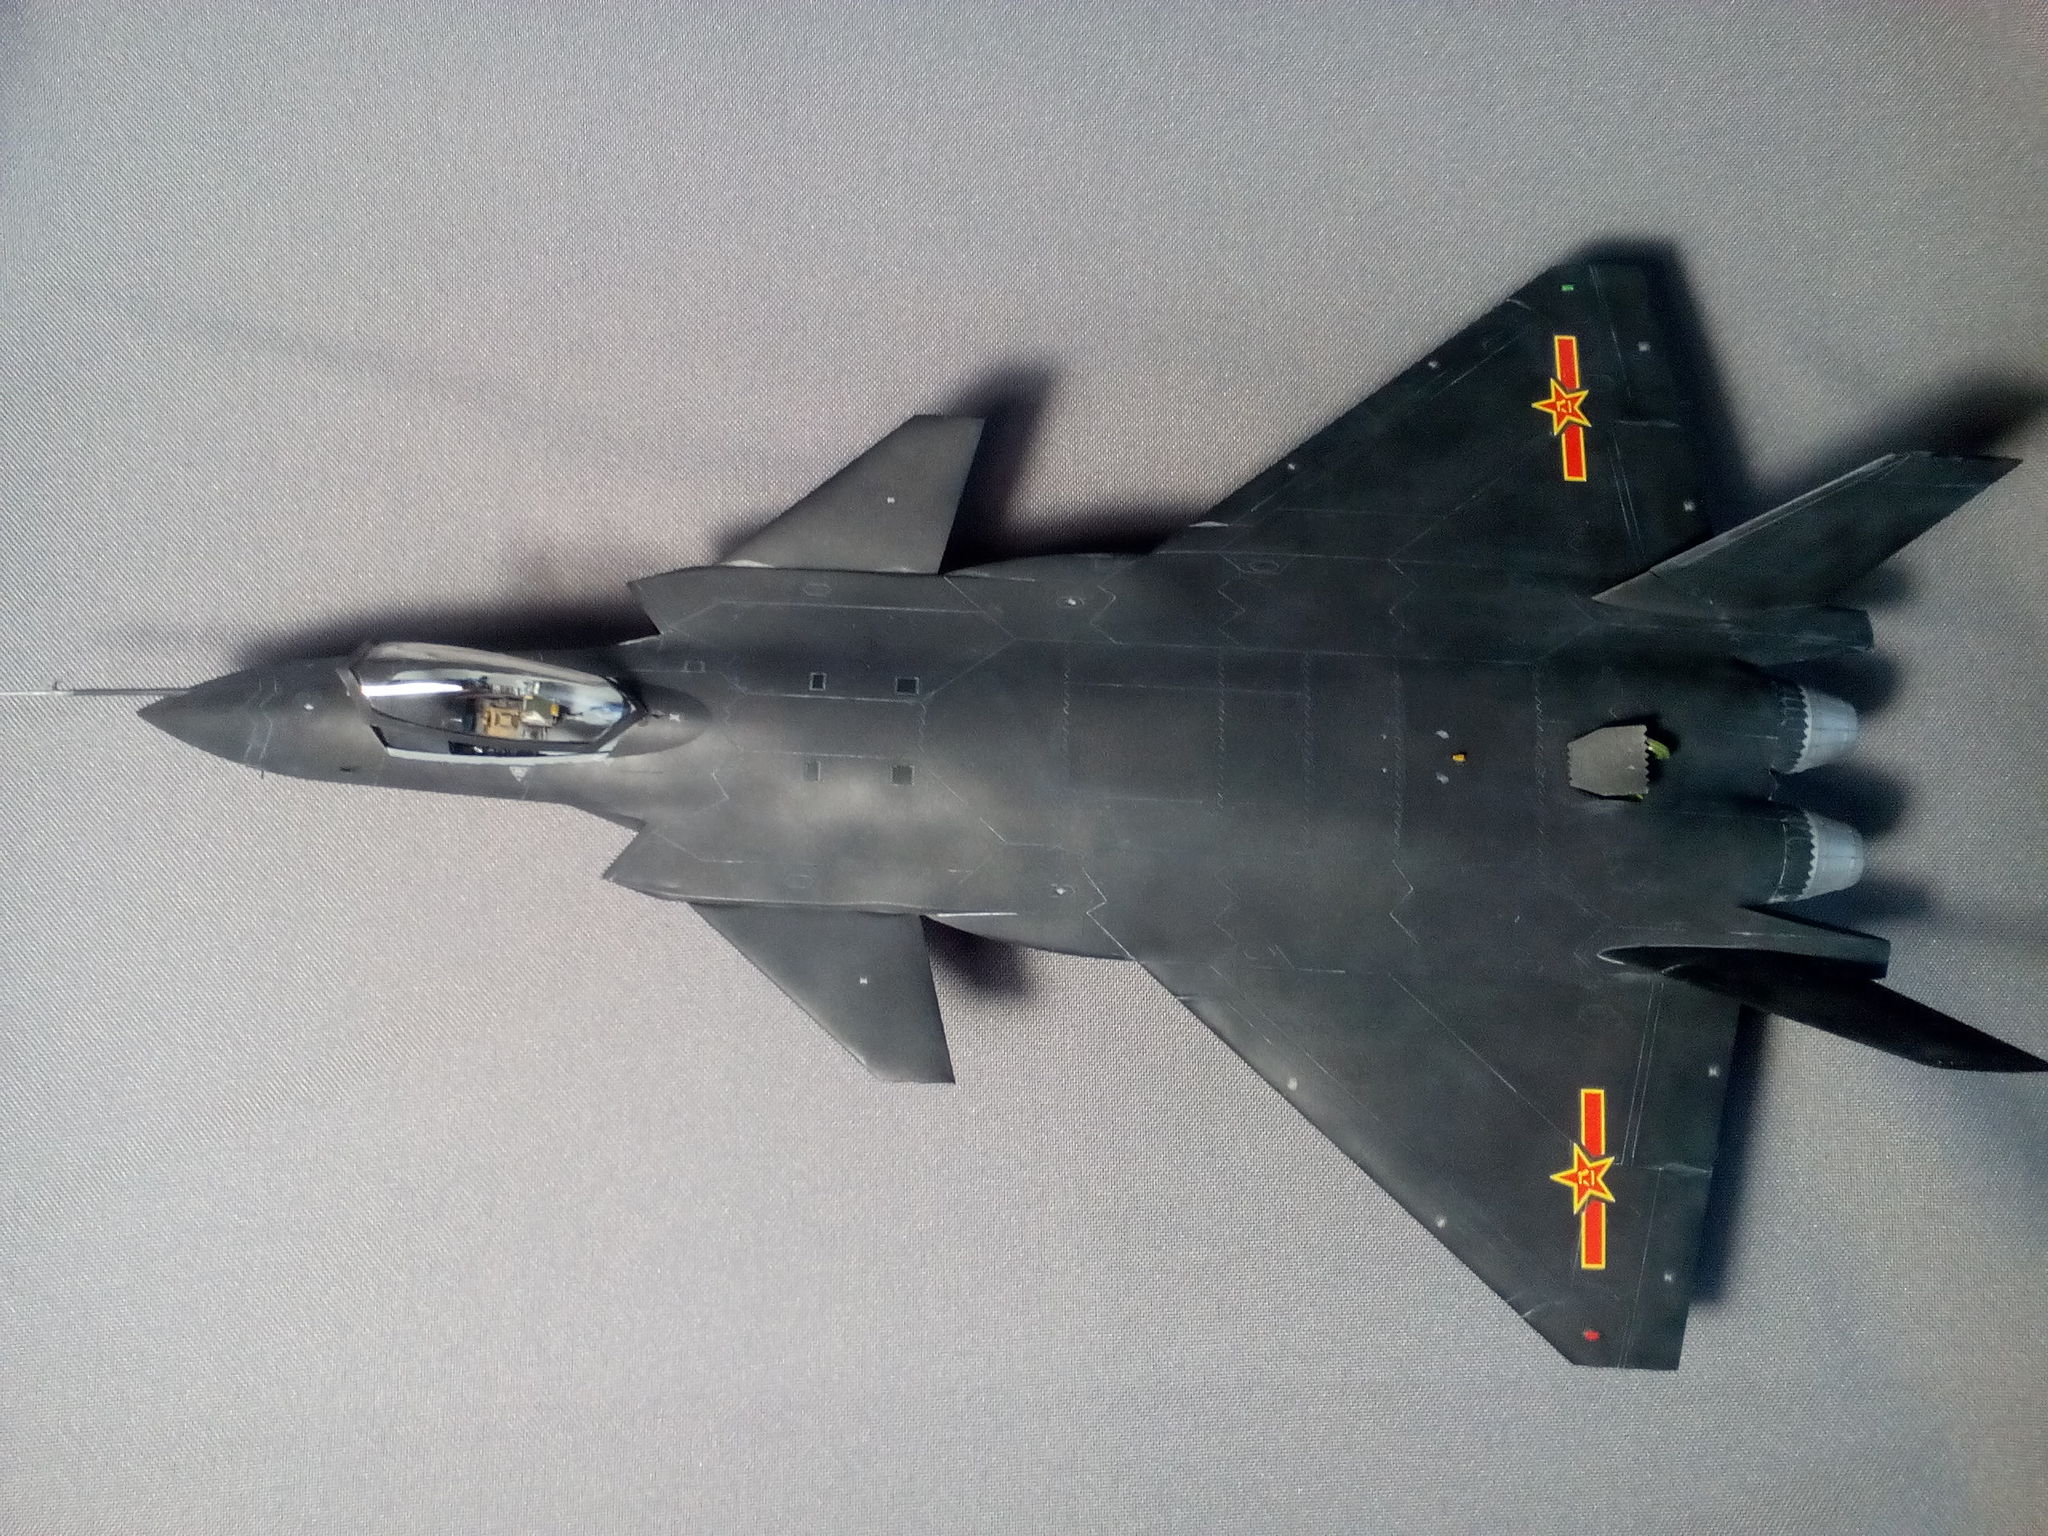 Dragon of Heaven. - My, Stand modeling, Prefabricated model, Aircraft modeling, Fighter, China, Fifth generation, Prototype, Longpost